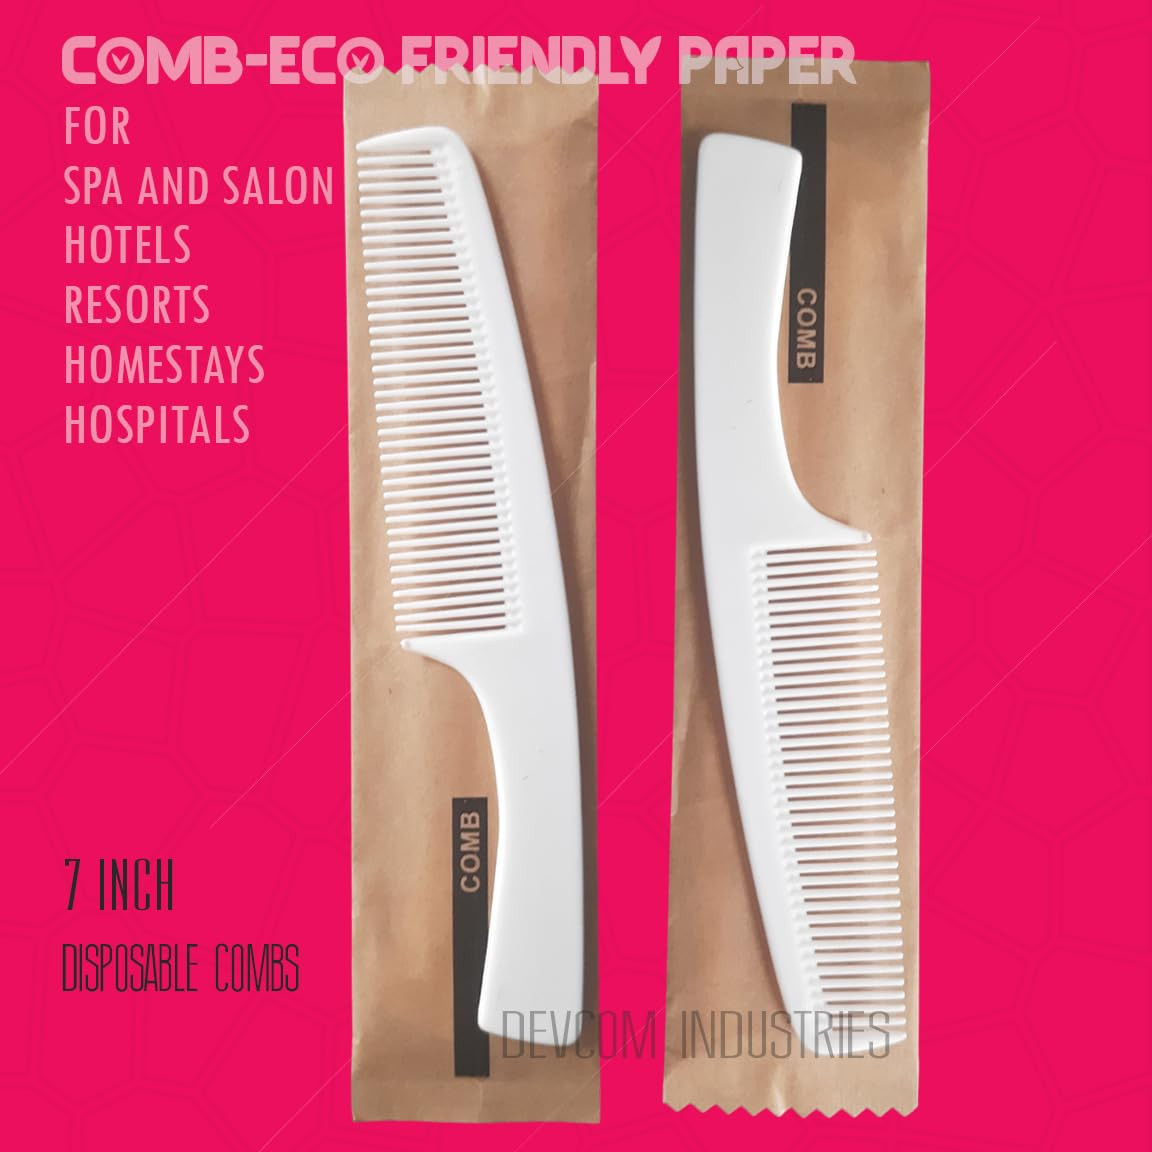 Zicniccom Hair Comb for Hotel-(50 pcs) BROWN KRAFTPAPER POUCH-PACKED-Disposable Pocket Plastic Combs for hotels, salons,SPA, Guest amenities, AirBNB,Travel hair comb